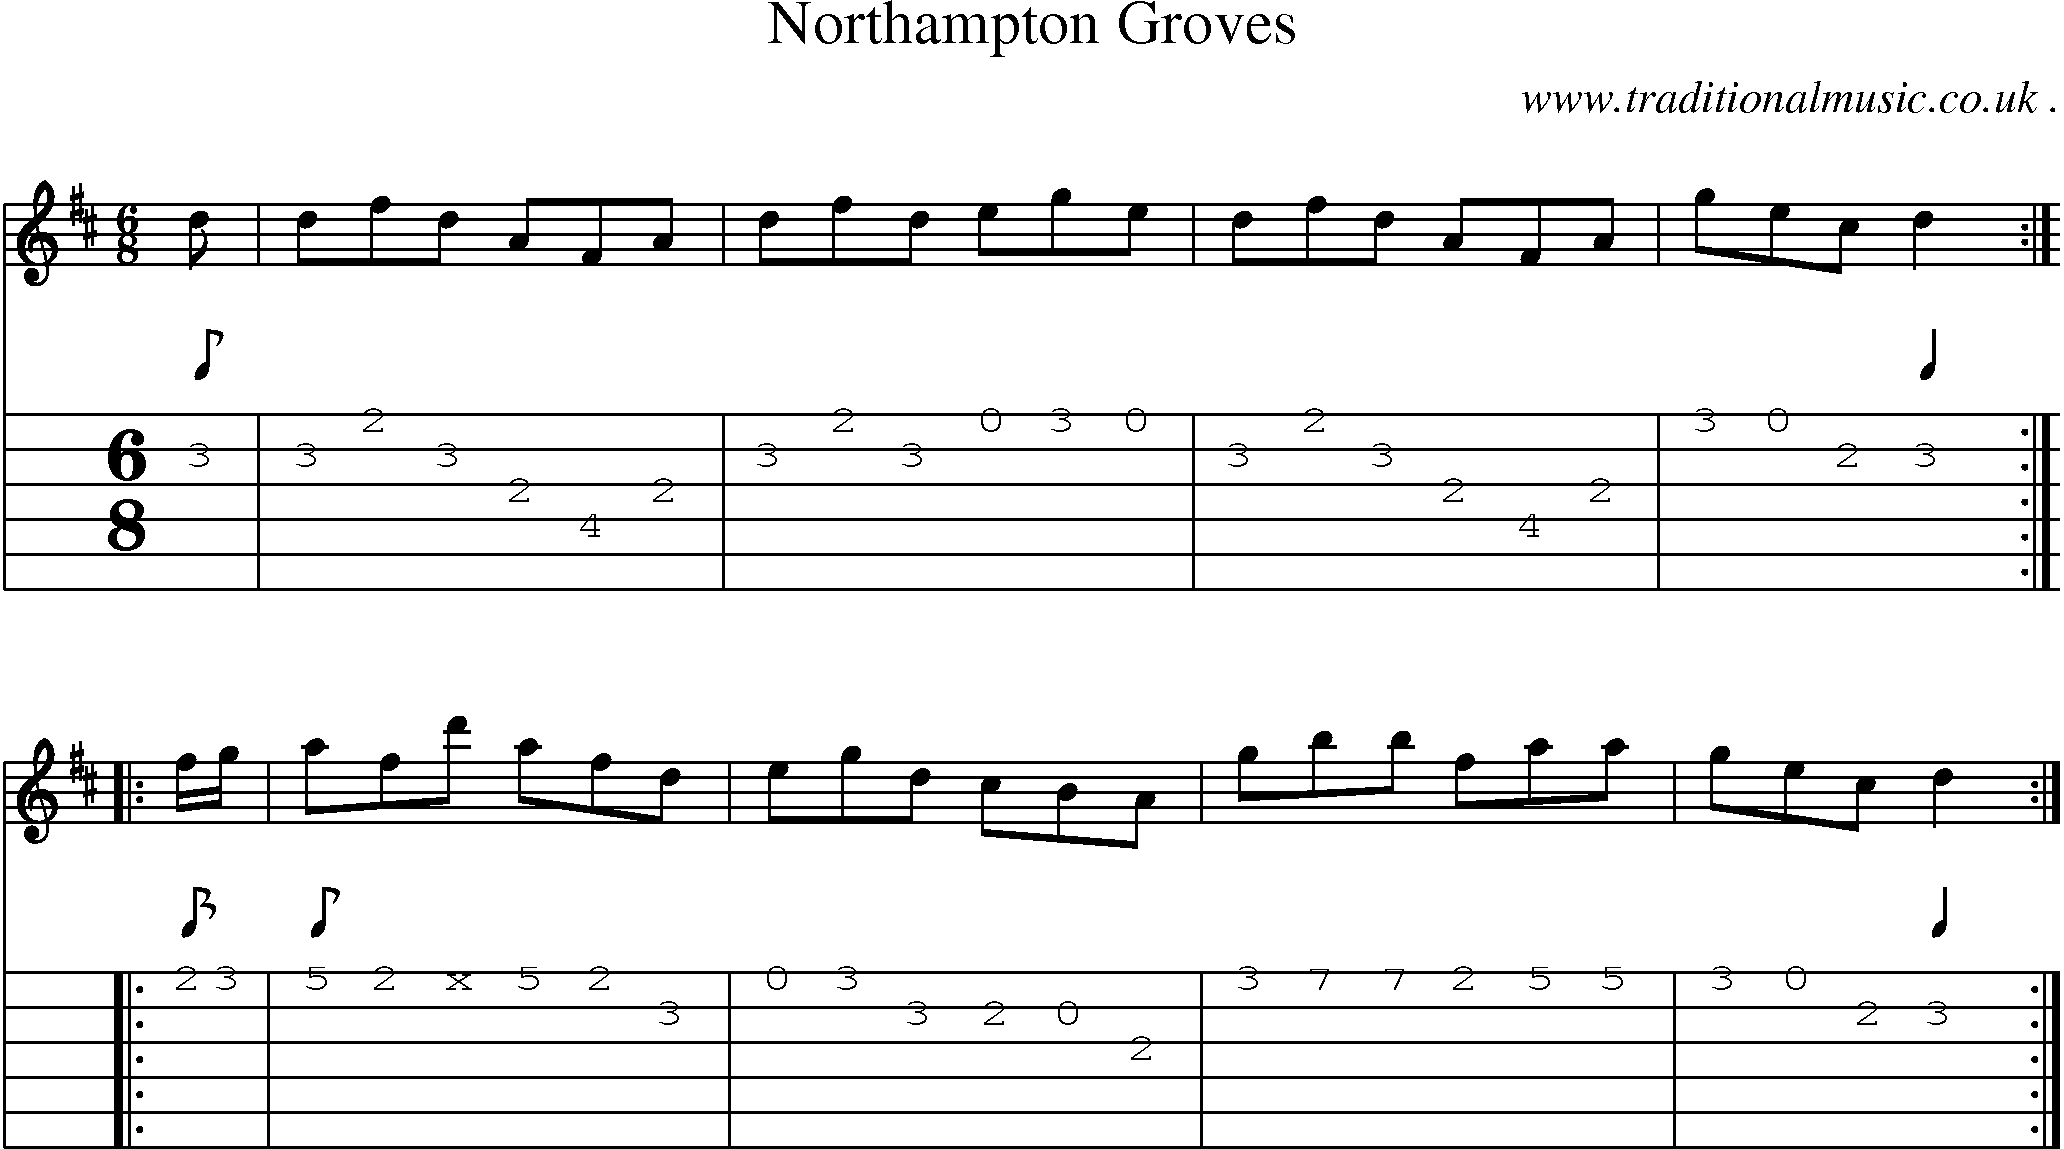 Sheet-Music and Guitar Tabs for Northampton Groves